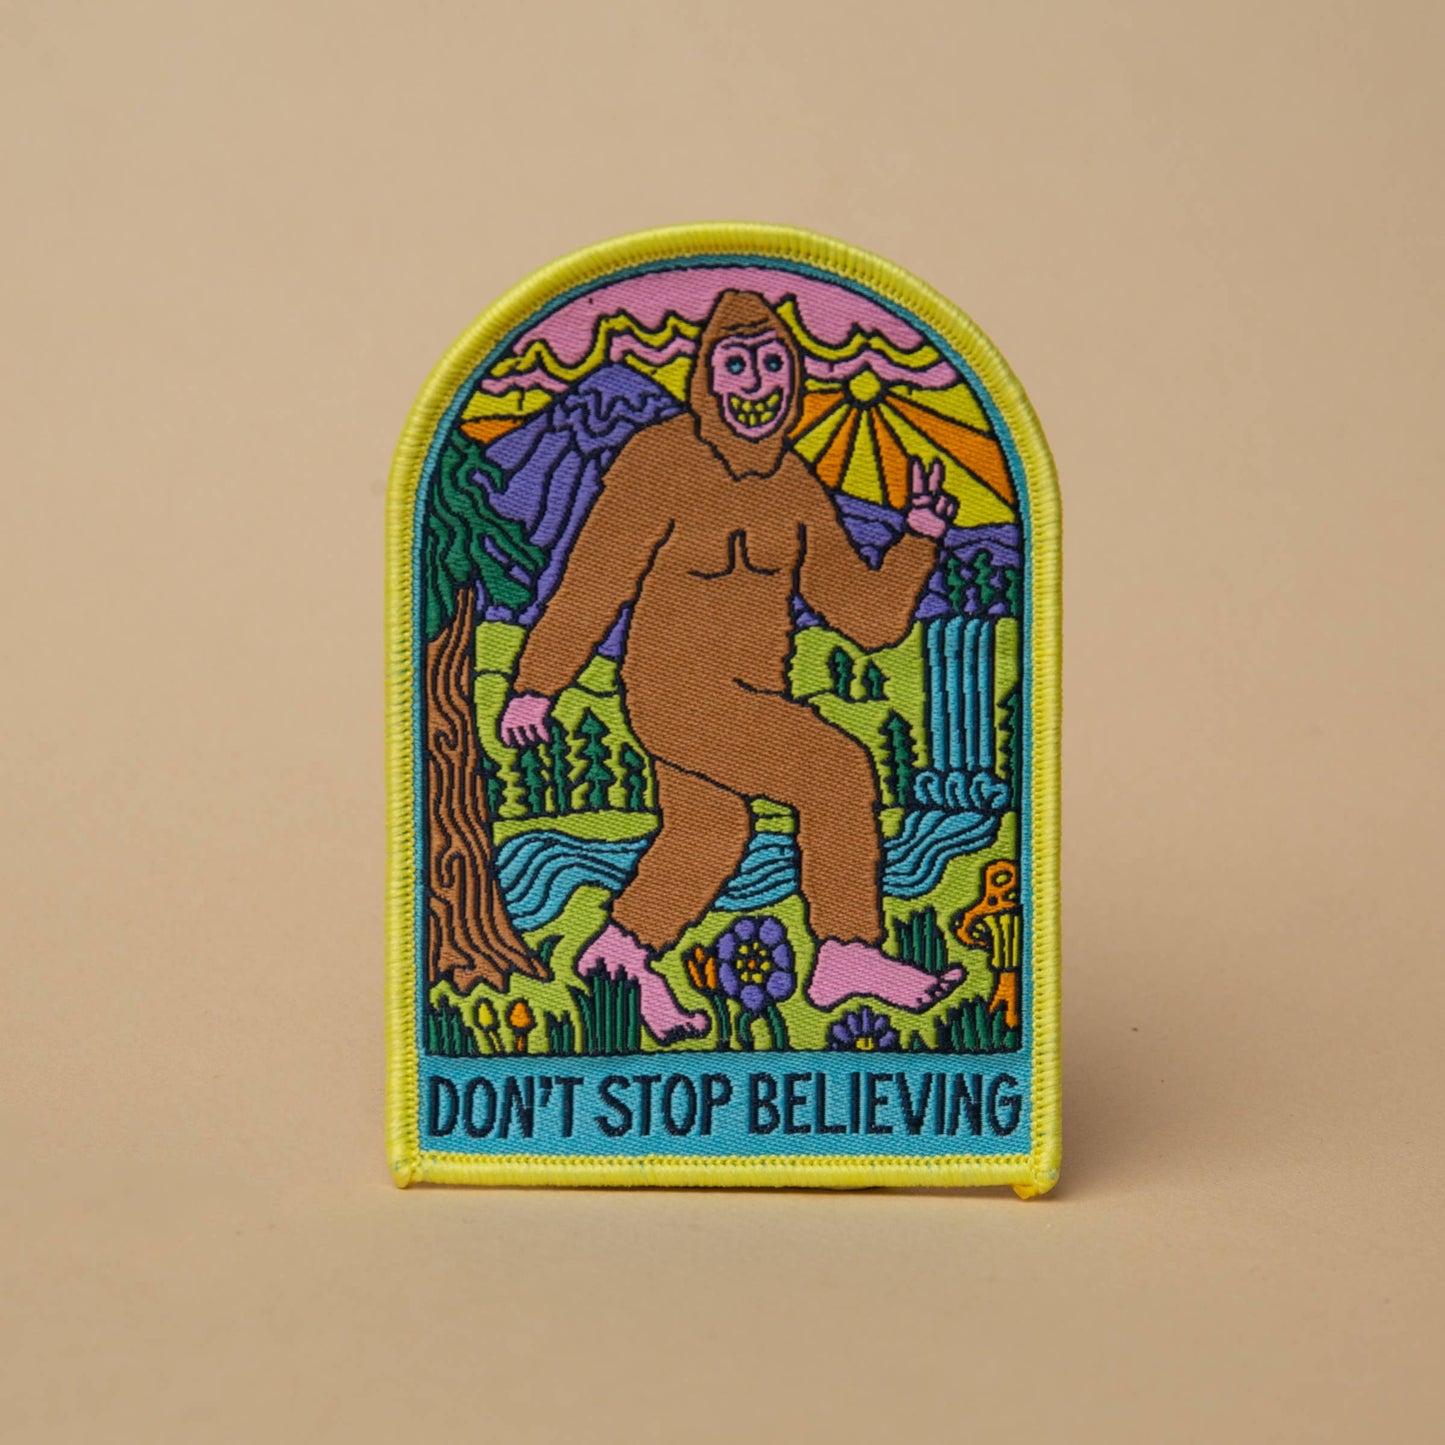 Tender Loving Empire - Don't Stop Believing Bigfoot Patch